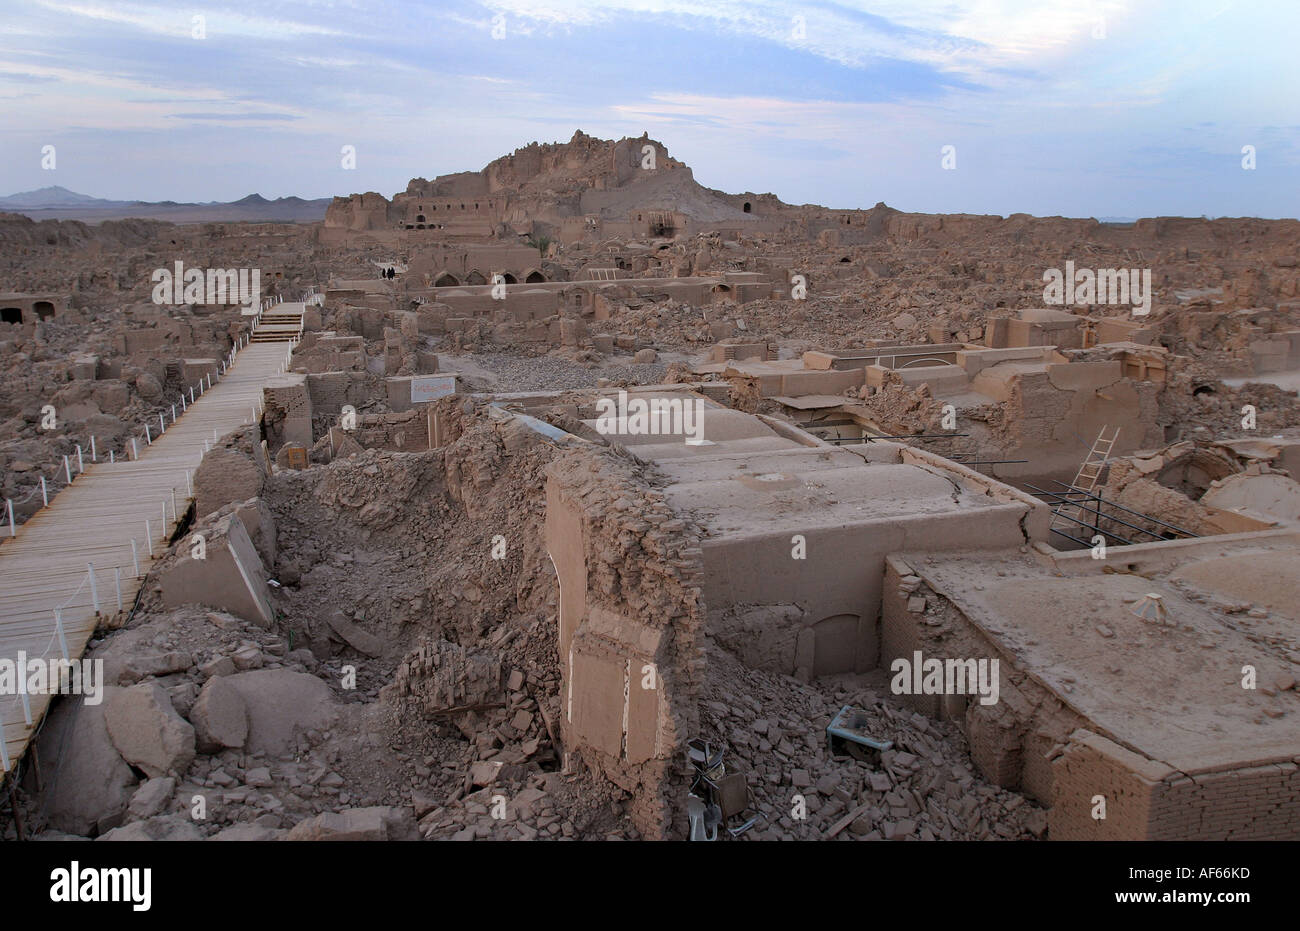 View of the old citadel (Arg e Bam) in Bam a year after the earthquake that destroyed the whole city, Iran, November 2004. Stock Photo